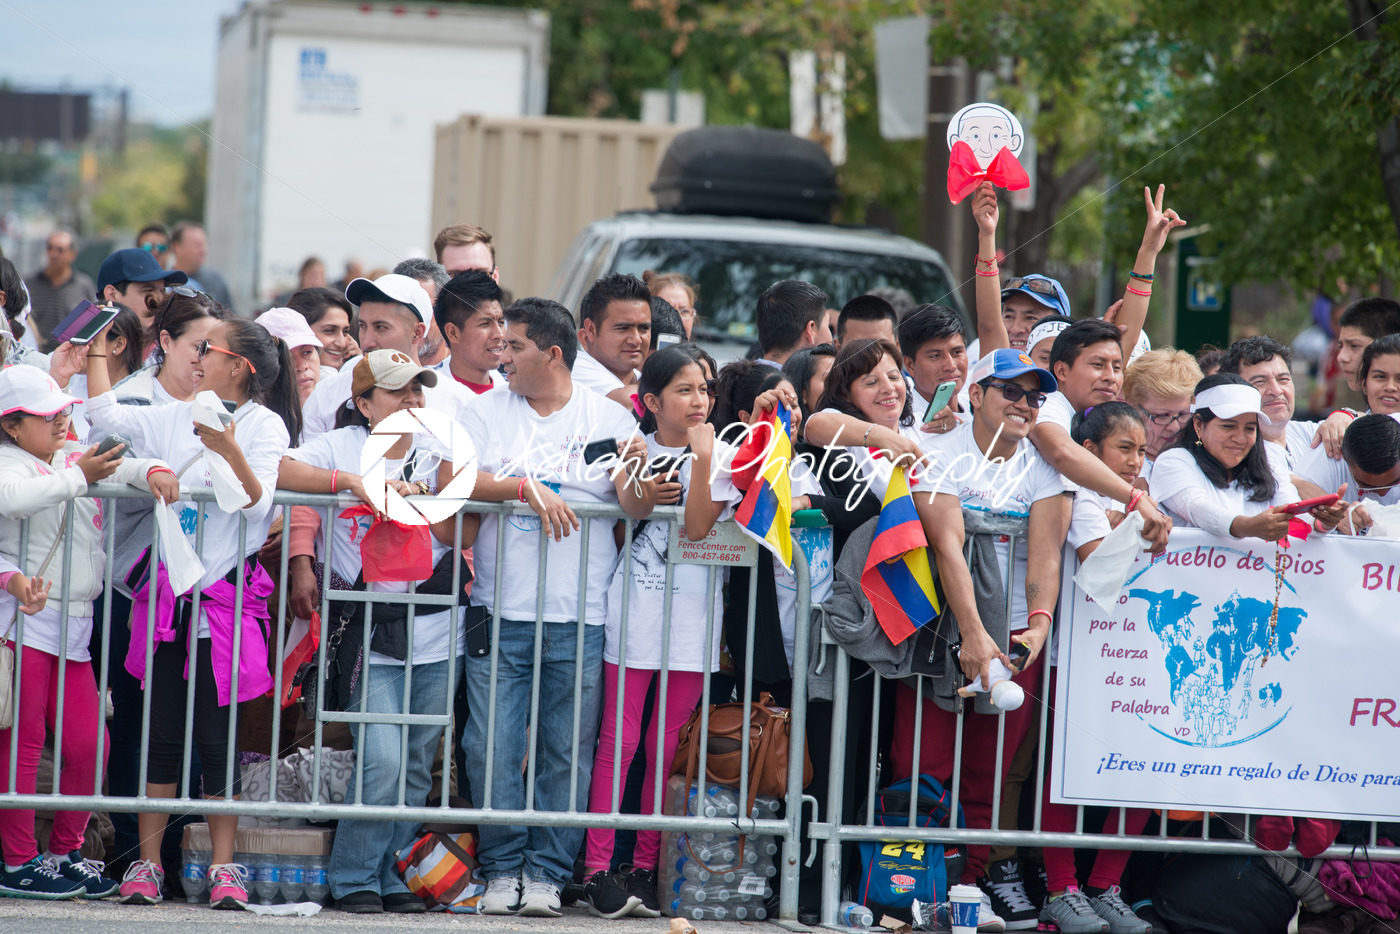 PHILADELPHIA, PA – SEPTEMBER 26: Crowds of people arrive on the Benjamin Franklin Parkway in Center City Philadelphia to see Pope Francis at the World Meeting of Families on September 26, 2015 - Kelleher Photography Store